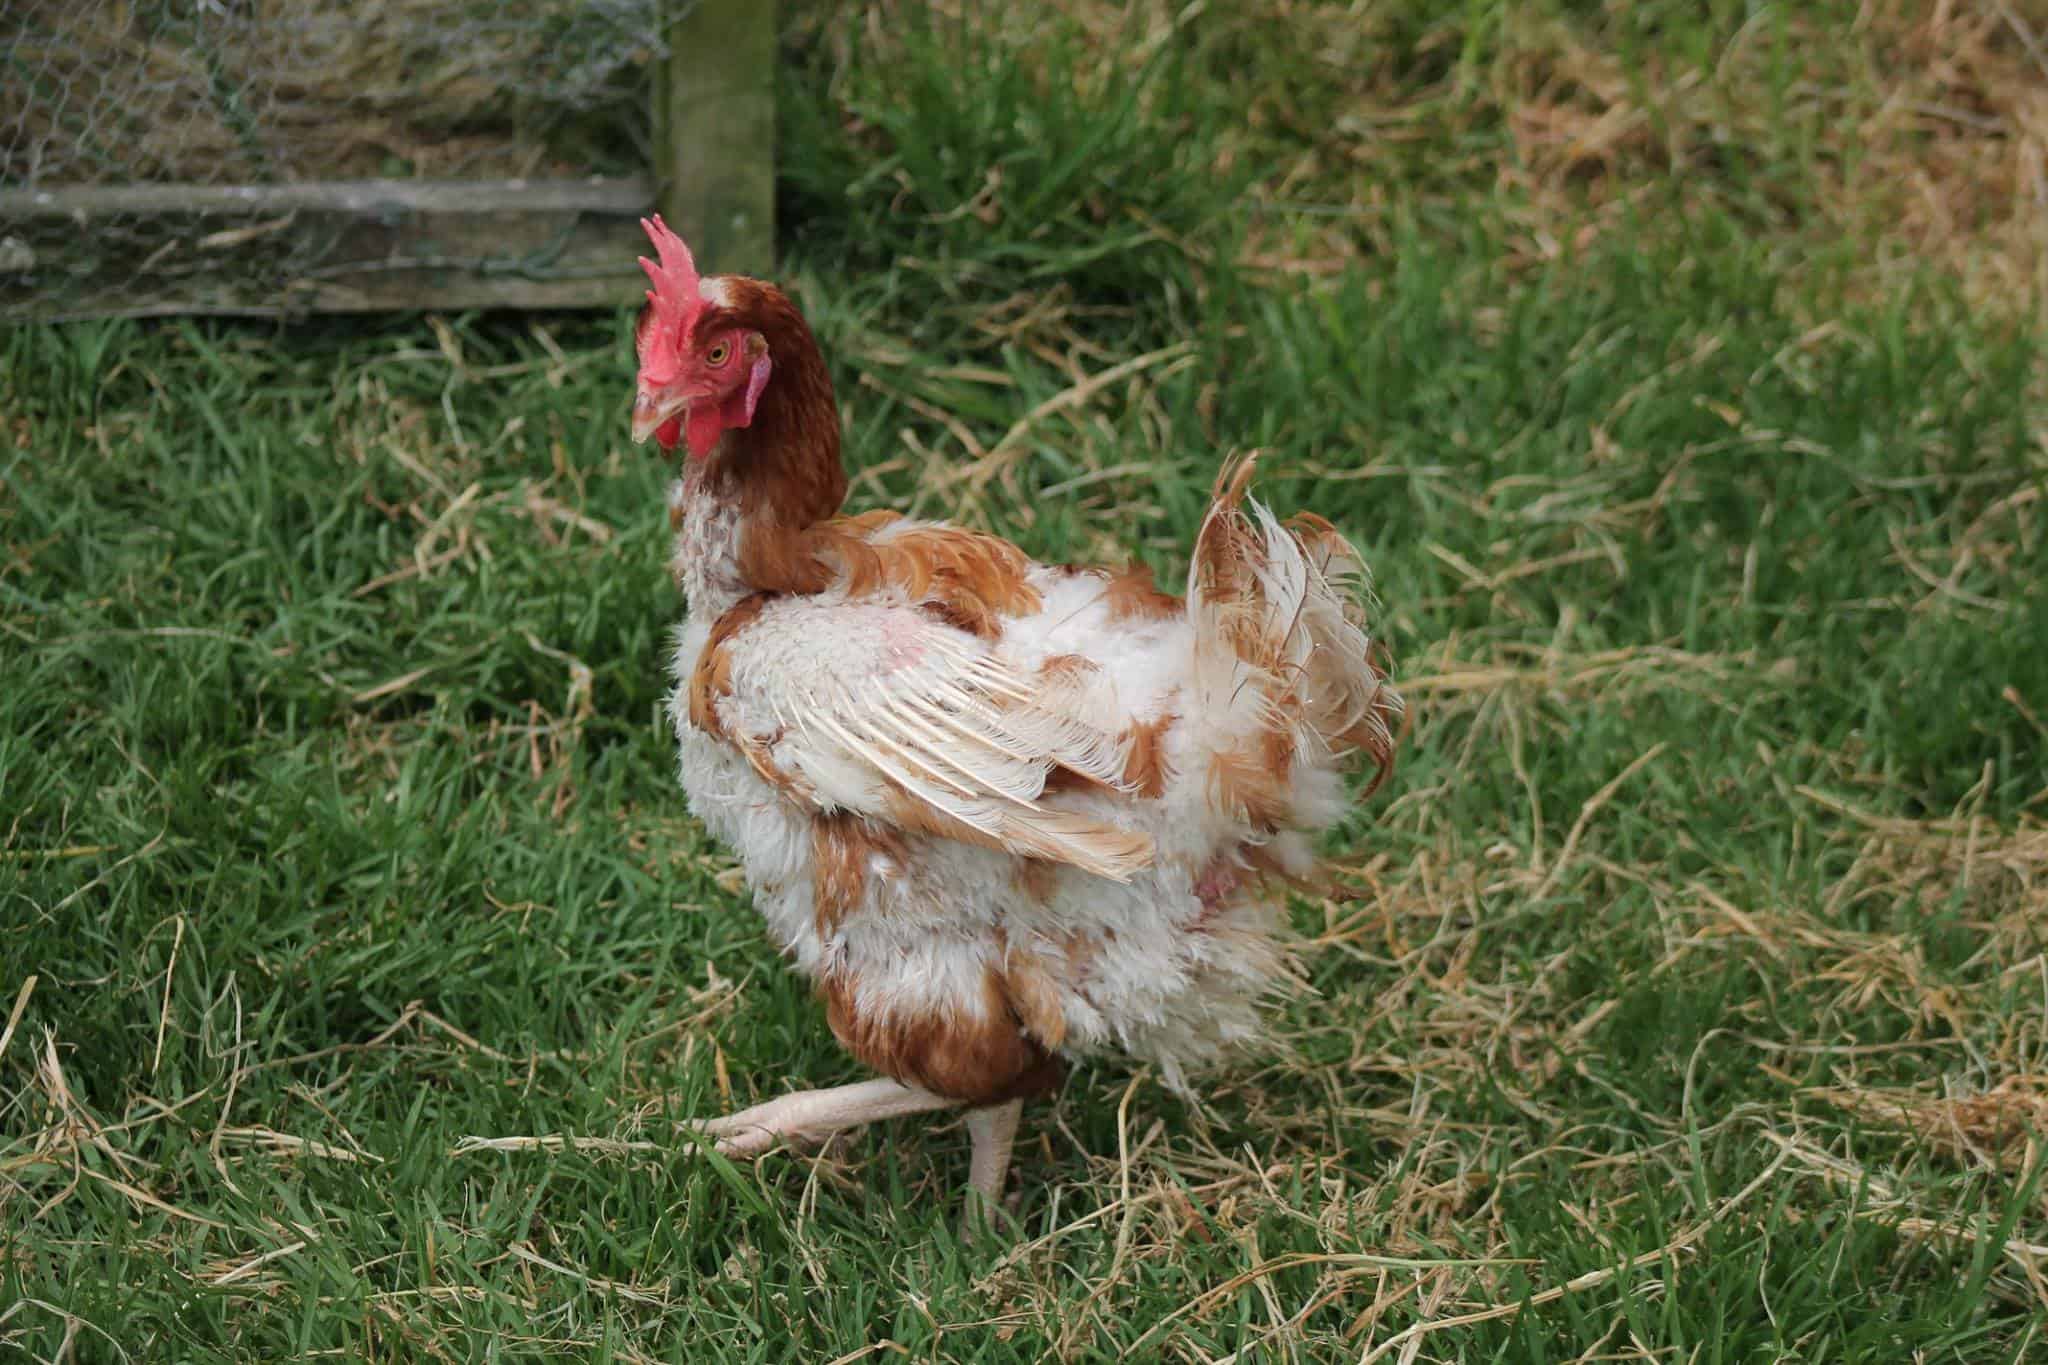 high protein for chickens during molting